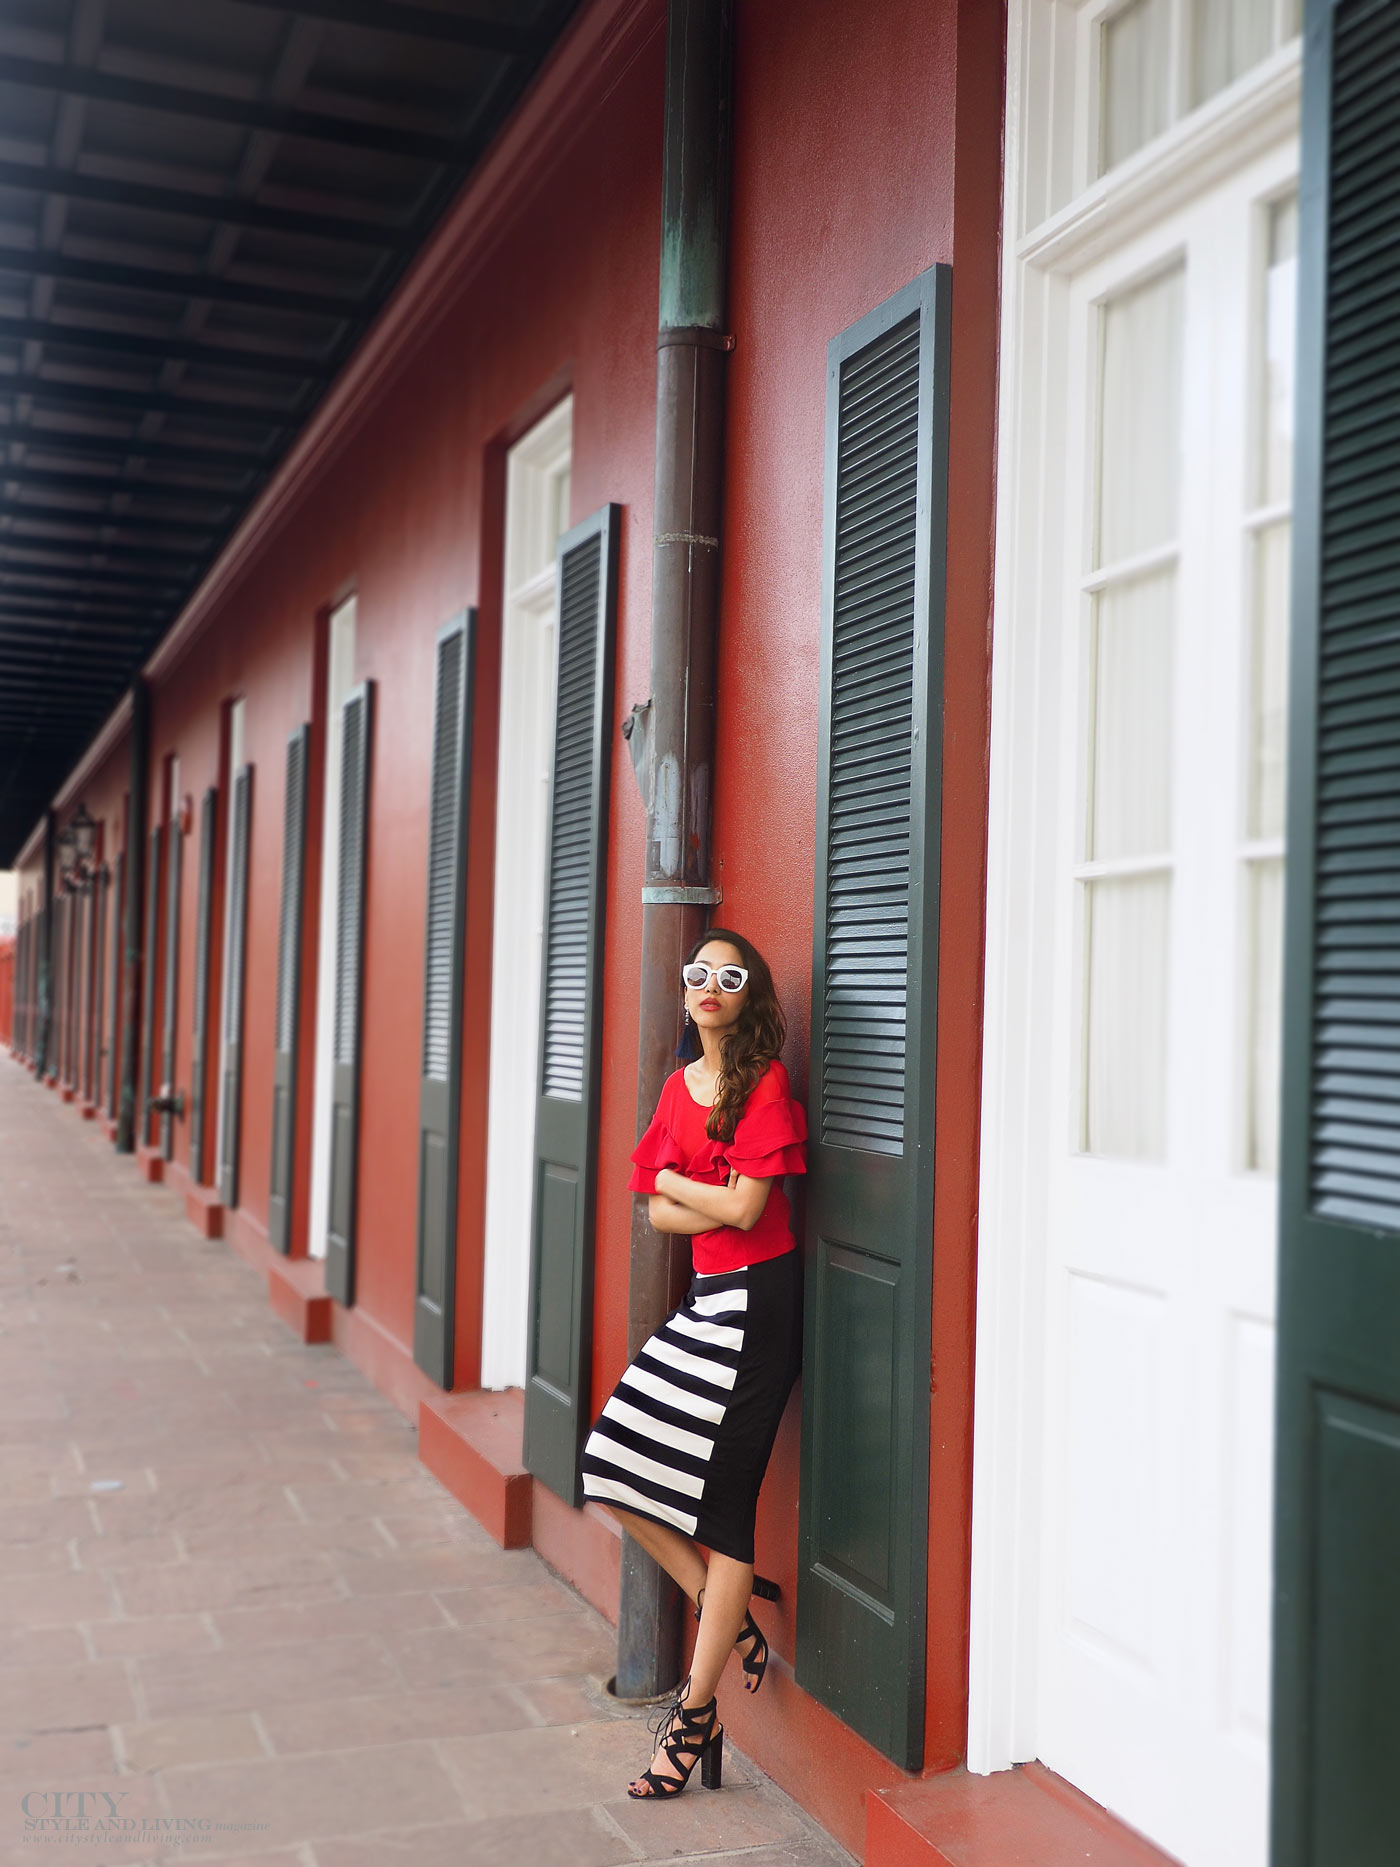 City style and living magazine The Editors Notebook style fashion blogger Shivana Maharaj french quarter new orleans ruffle top and striped skirt